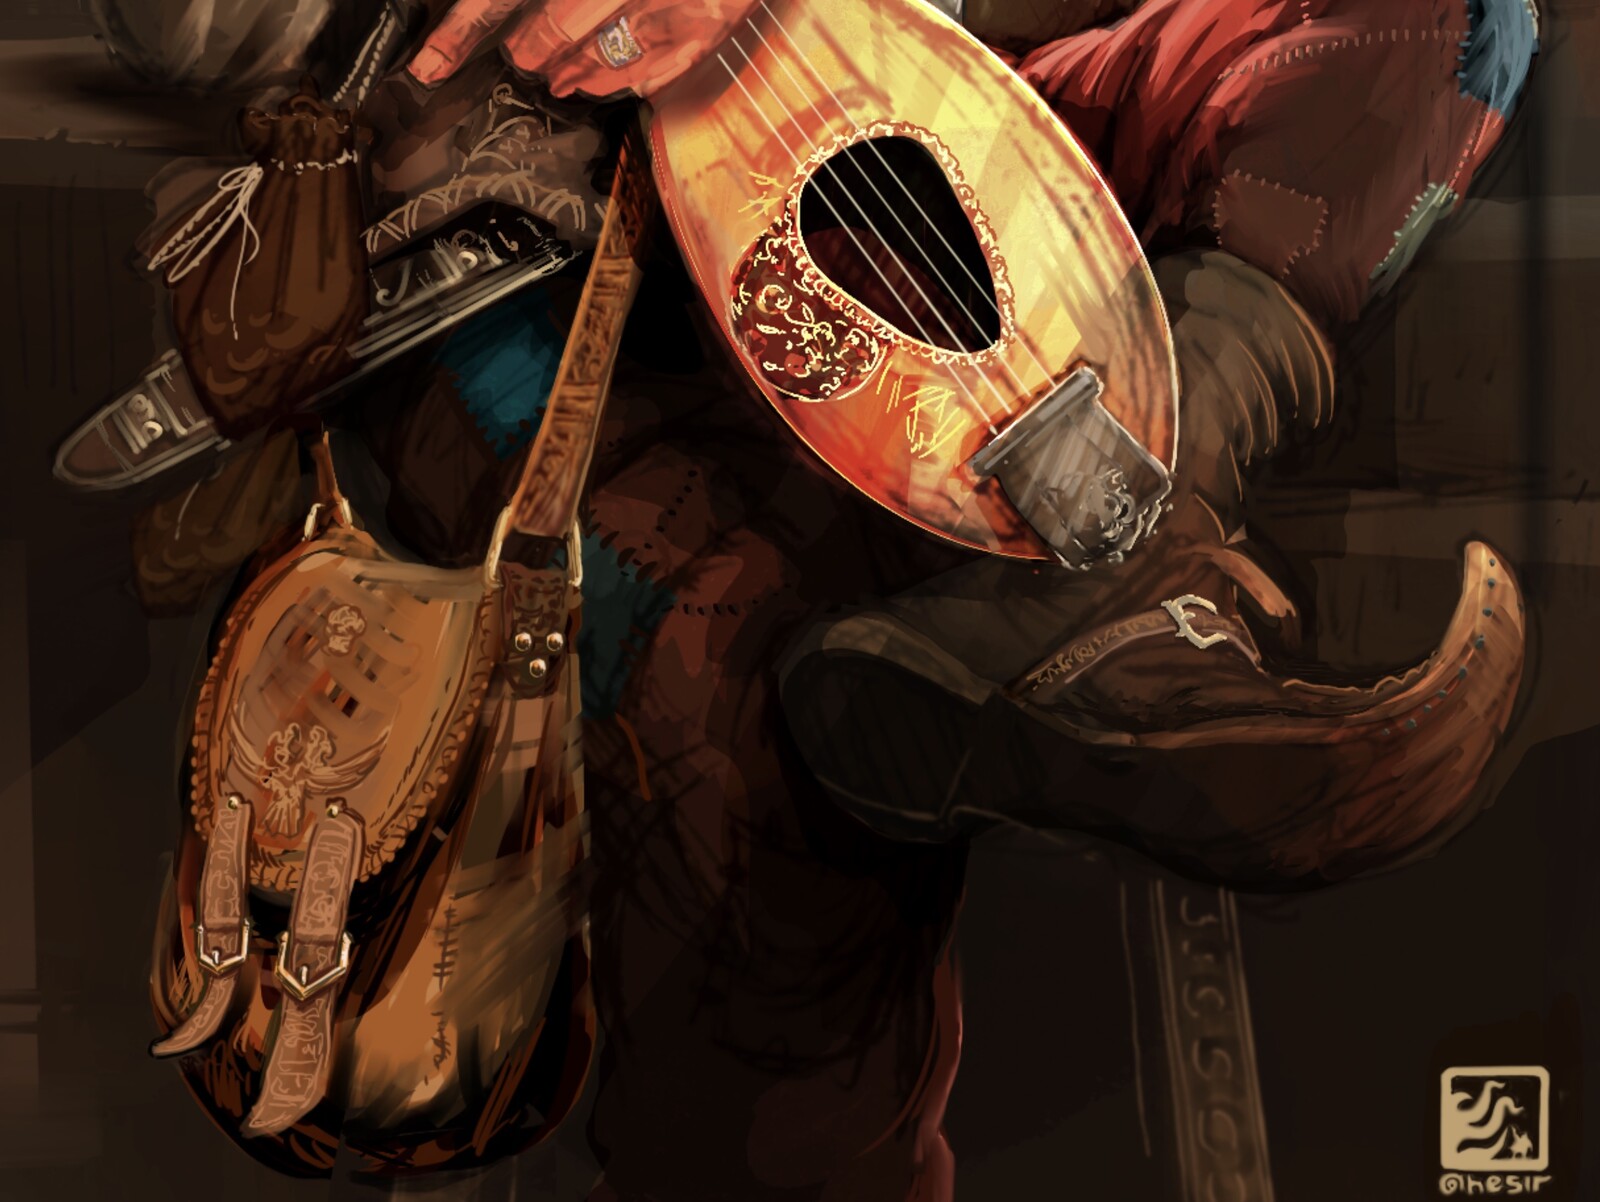 Detail of Lute, Boot and Bag. These where the areas I found myself most satisfied with, mostly due to the relative speed of execution. I didn't over labour or spend too much time blending, reblocking and reblending here, they just came together quickly.